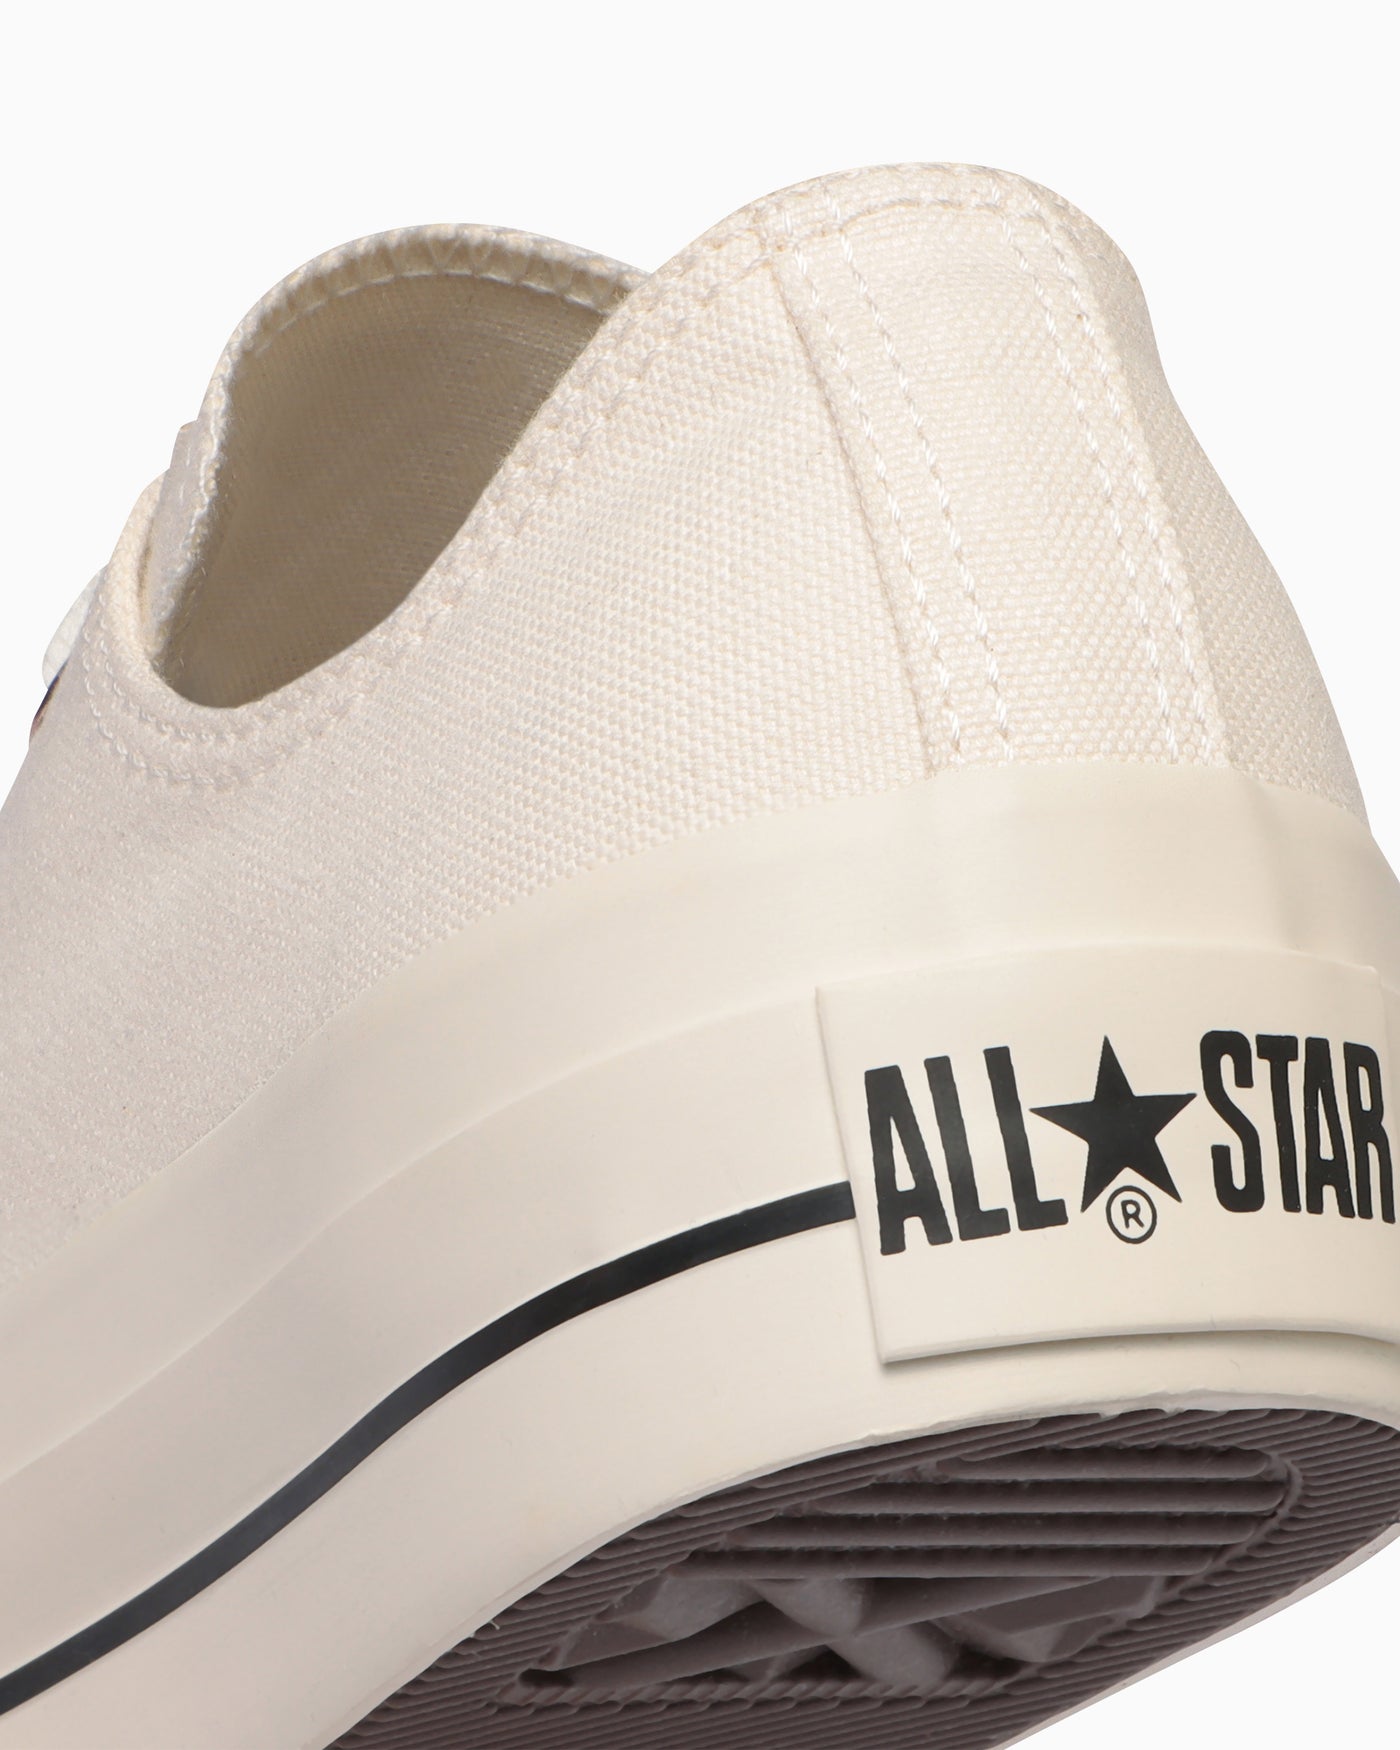 ALL STAR PLTS PG OX